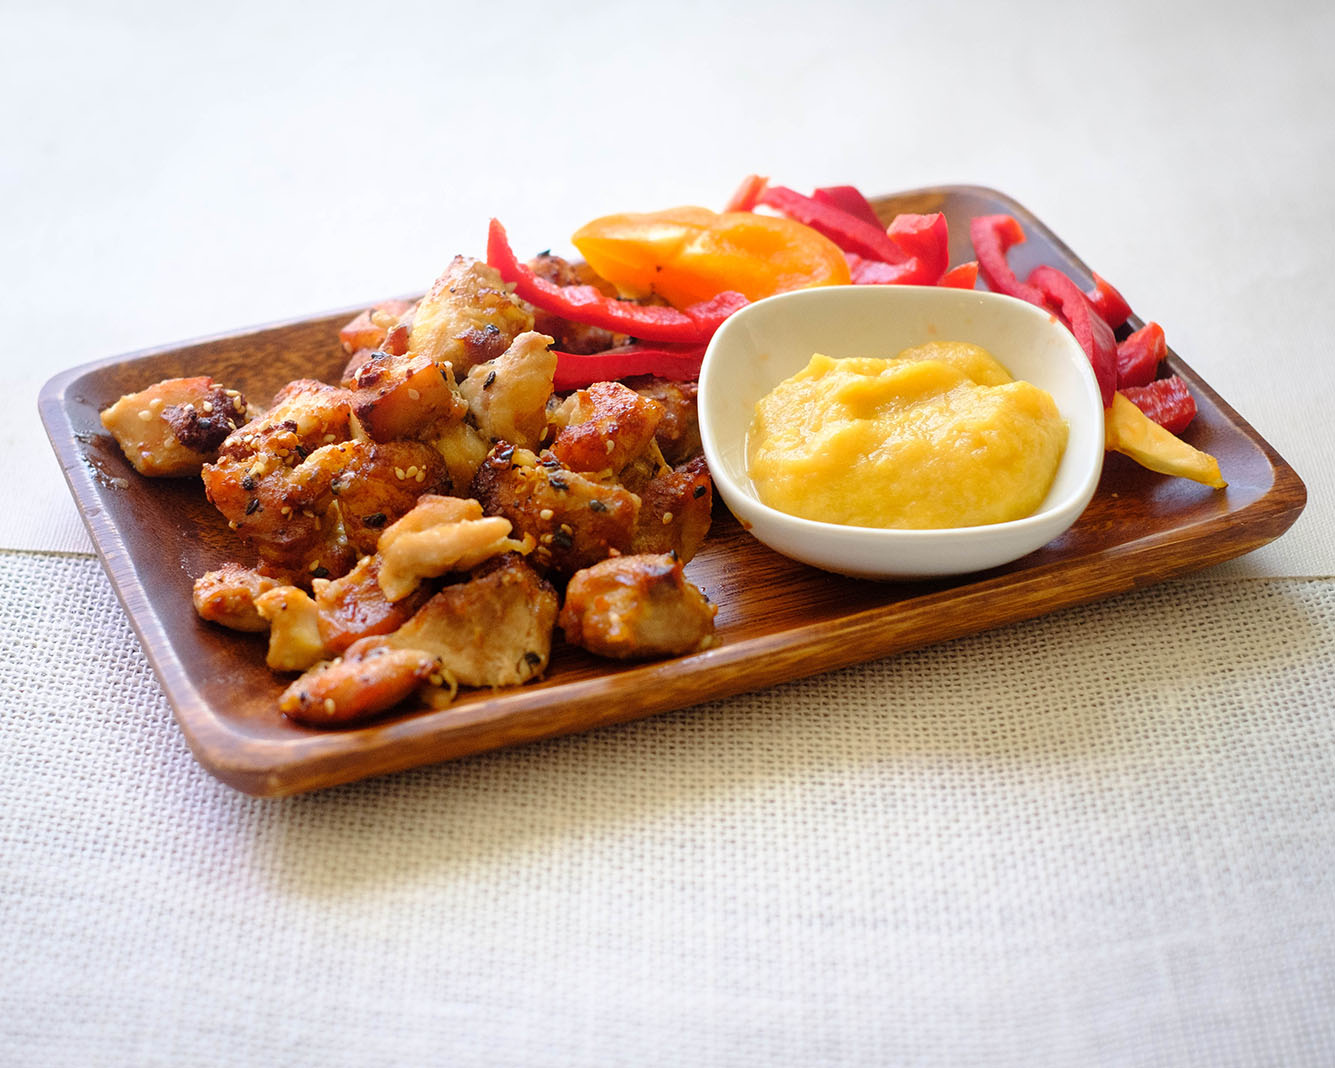 rectangular wooden plate with small bite size chicken pieces, sliced red bell peppers, and honey mustard applesauce